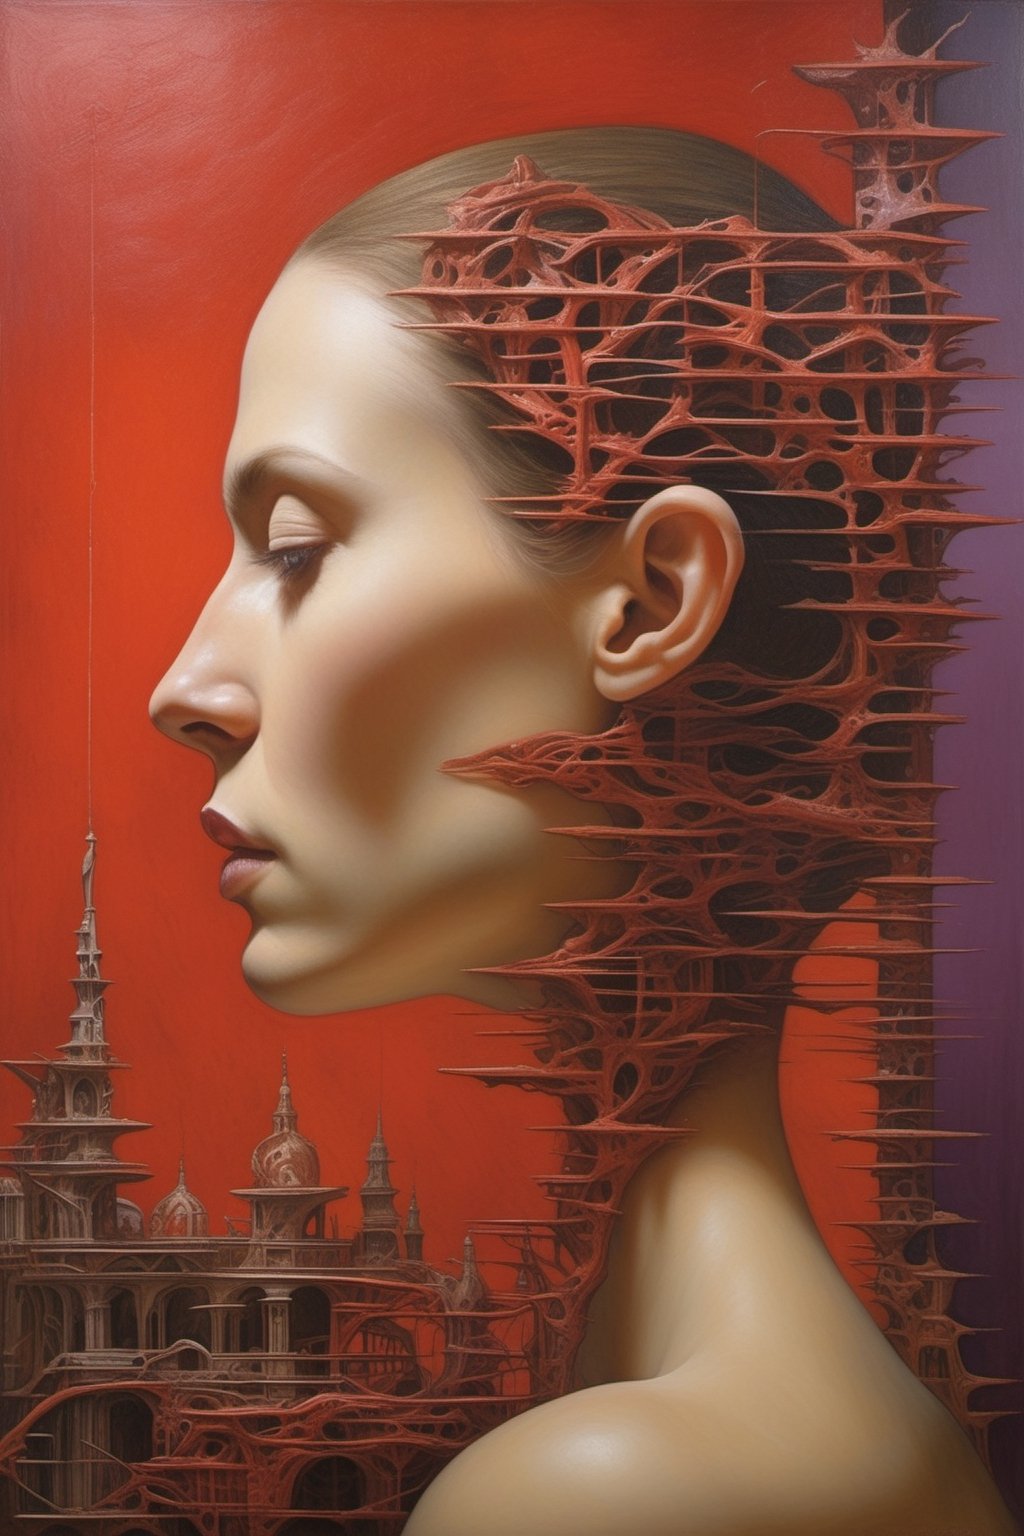 
a painting that features the profile of a human head, sectioned to reveal a complex interior structure. The head, which seems to be a fusion of organic and concrete elements, has an open segment showing the interior of the building. resembles the interior of a grand yet desolate architectural space, possibly an abandoned futuristic temple or assembly. serene grace and dystopian complexity, inspired by Escher's paradoxical art and Gric's hyperrealistic style (gric style:1.15).  The model, positioned at the heart of this juxtaposition, wears an outfit that captures the ethereal beauty of serene dreams while echoing the sinuous lines of a nightmarish landscape. The surrounding foliage is lush yet ghostly, alive with a mix of tranquil and unsettling energies. The lighting, a blend of soft, ambient twilight and subtle, uncanny glows, casts the face in a light that is both tranquil and haunting. The expression captures a profound contemplation, an otherworldly elegance touched by a sense of dark, macabre beauty. This portrait, embodying both peaceful serenity and dark allure, plays with perspective and fluidity, contrasting the structured complexity of fashion with the effortless, albeit eerie, grace of nature. The color palette, rich in dark purples and varying shades of red, adds depth and intensity to this hyperrealistic
PORTRAIT PHOTO,stalker, very specific pose ,Gric, Aligned eyes,  Iridescent Eyes,  (blush,  eye_wrinkles:0.6),  (((textured skin))), (goosebumps:0.5),  subsurface scattering,  ((skin pores)),  (detailed skin texture),  (( textured skin)),  realistic dull (skin noise),  visible skin detail,  skin fuzz,  dry skin,  hyperdetailed face,  sharp picture,  sharp detailed,  (((analog grainy photo vintage))),  Rembrandt lighting,  ultra focus,  illuminated face,  detailed face,  8k resolution,